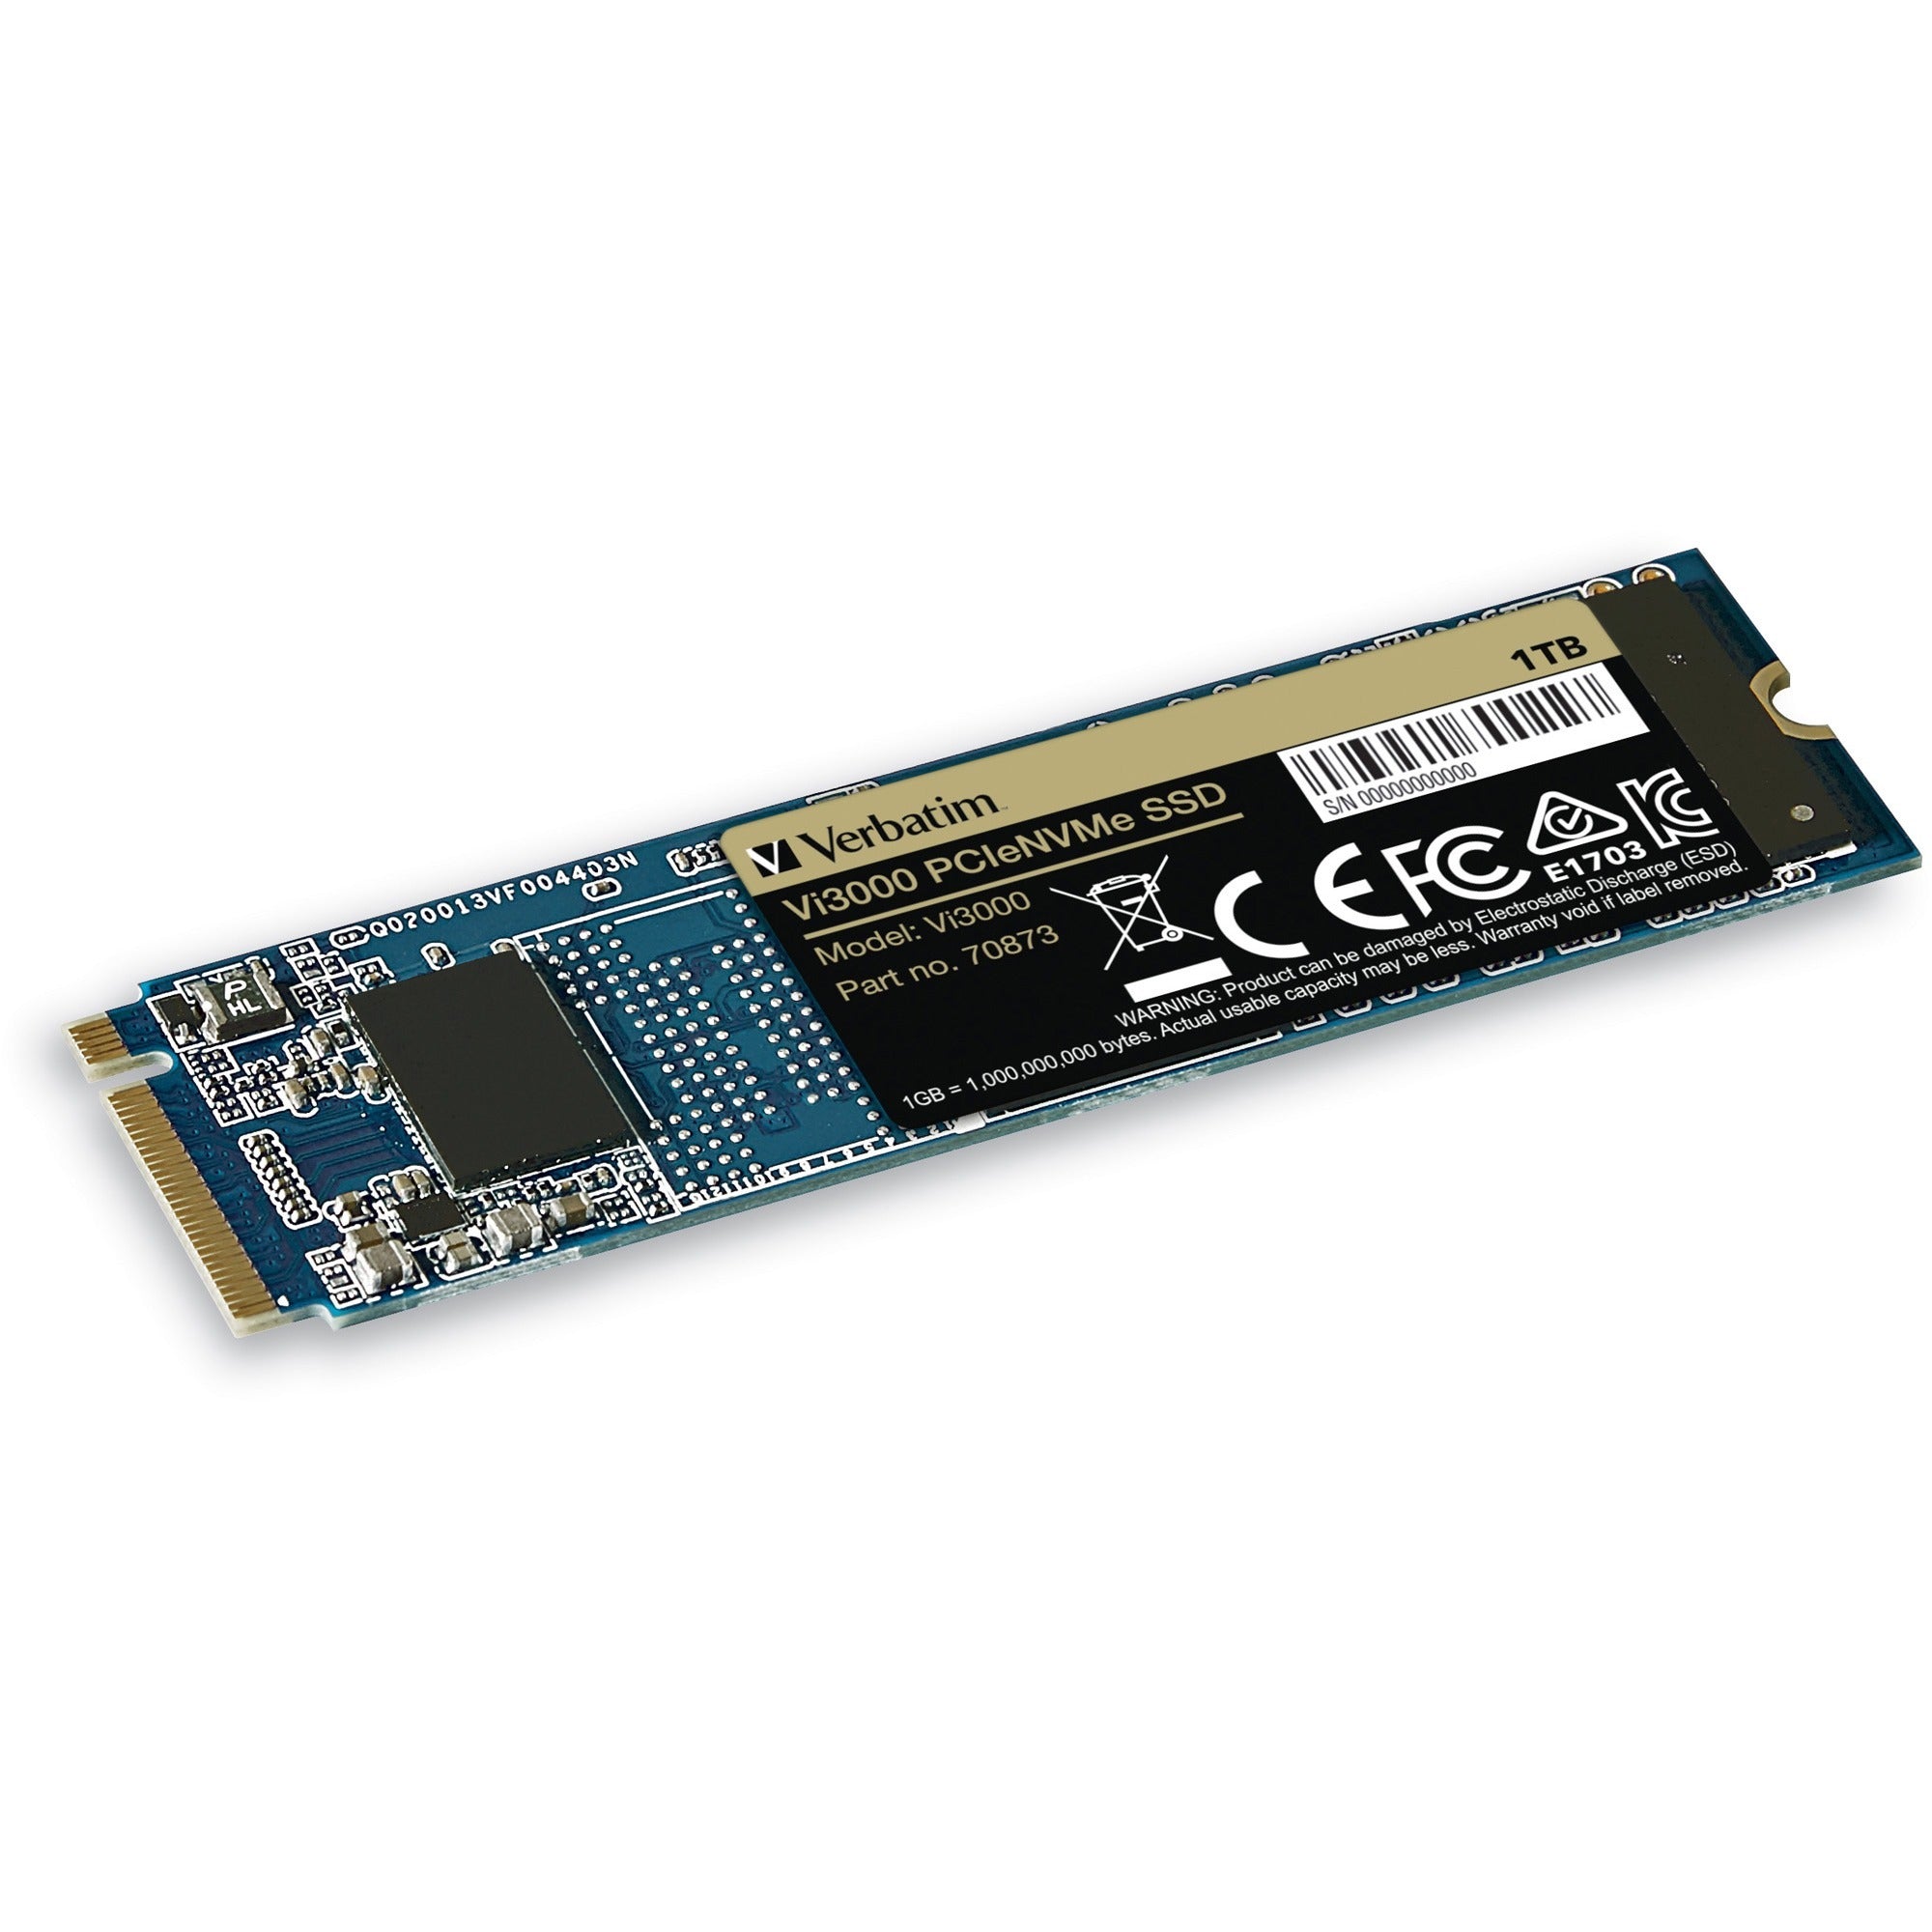 verbatim-vi3000-1-tb-solid-state-drive-m2-2280-internal-pci-express-nvme-pci-express-nvme-30-x4-notebook-desktop-pc-device-supported-600-tb-tbw-3000-mb-s-maximum-read-transfer-rate-5-year-warranty_ver70873 - 1